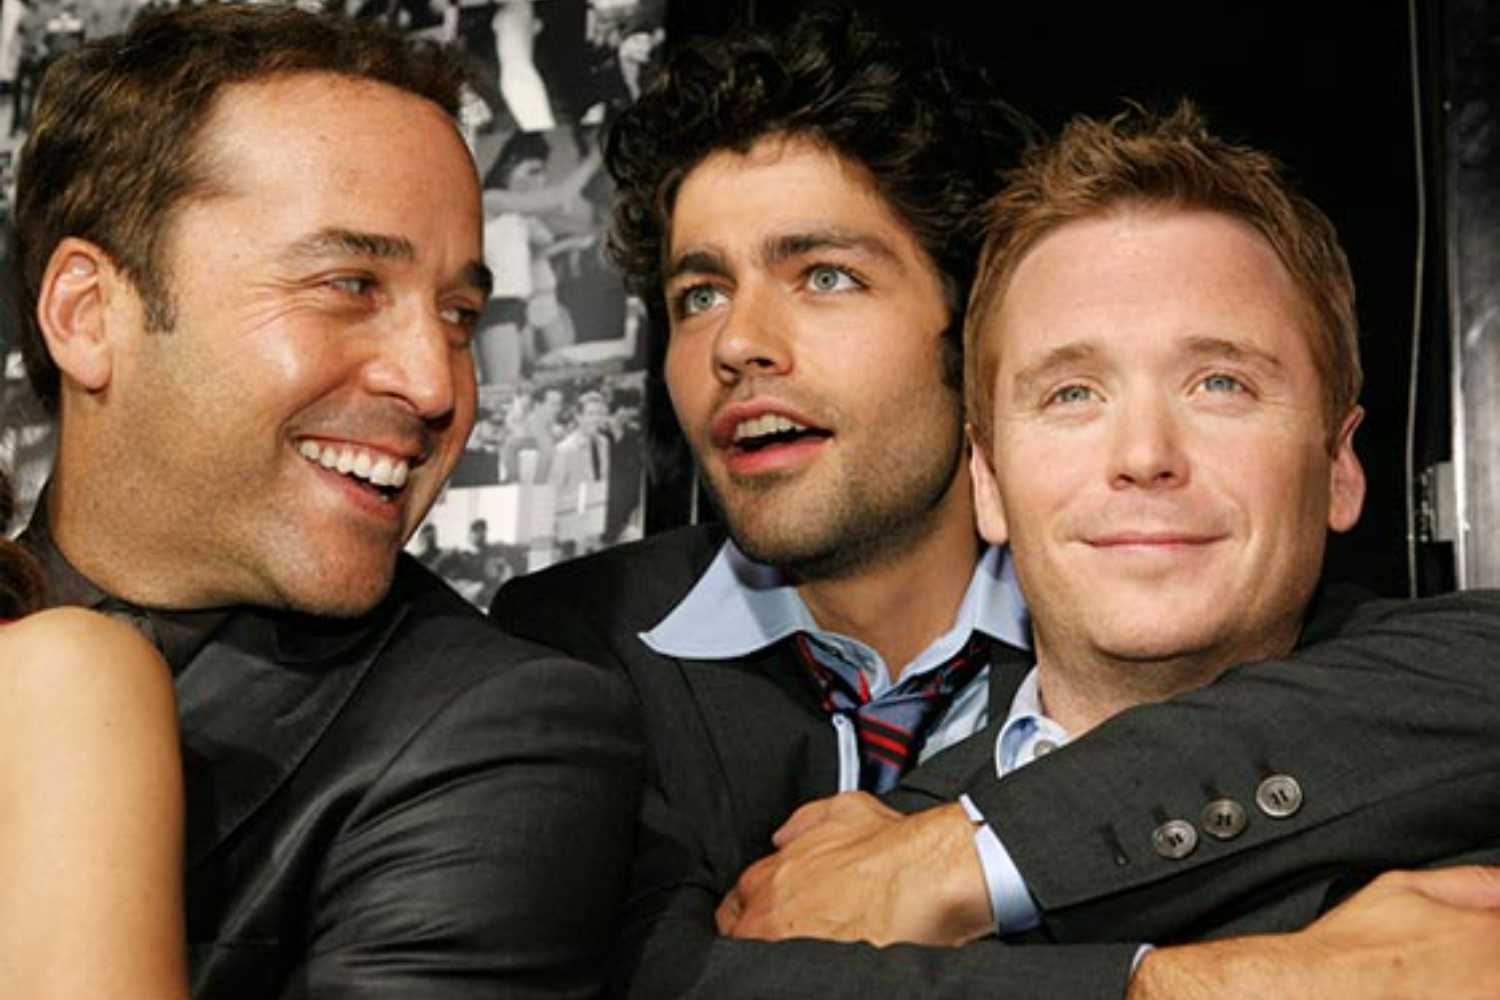 Adrian Grenier, Kevin Connolly and Jeremy Samuel Piven